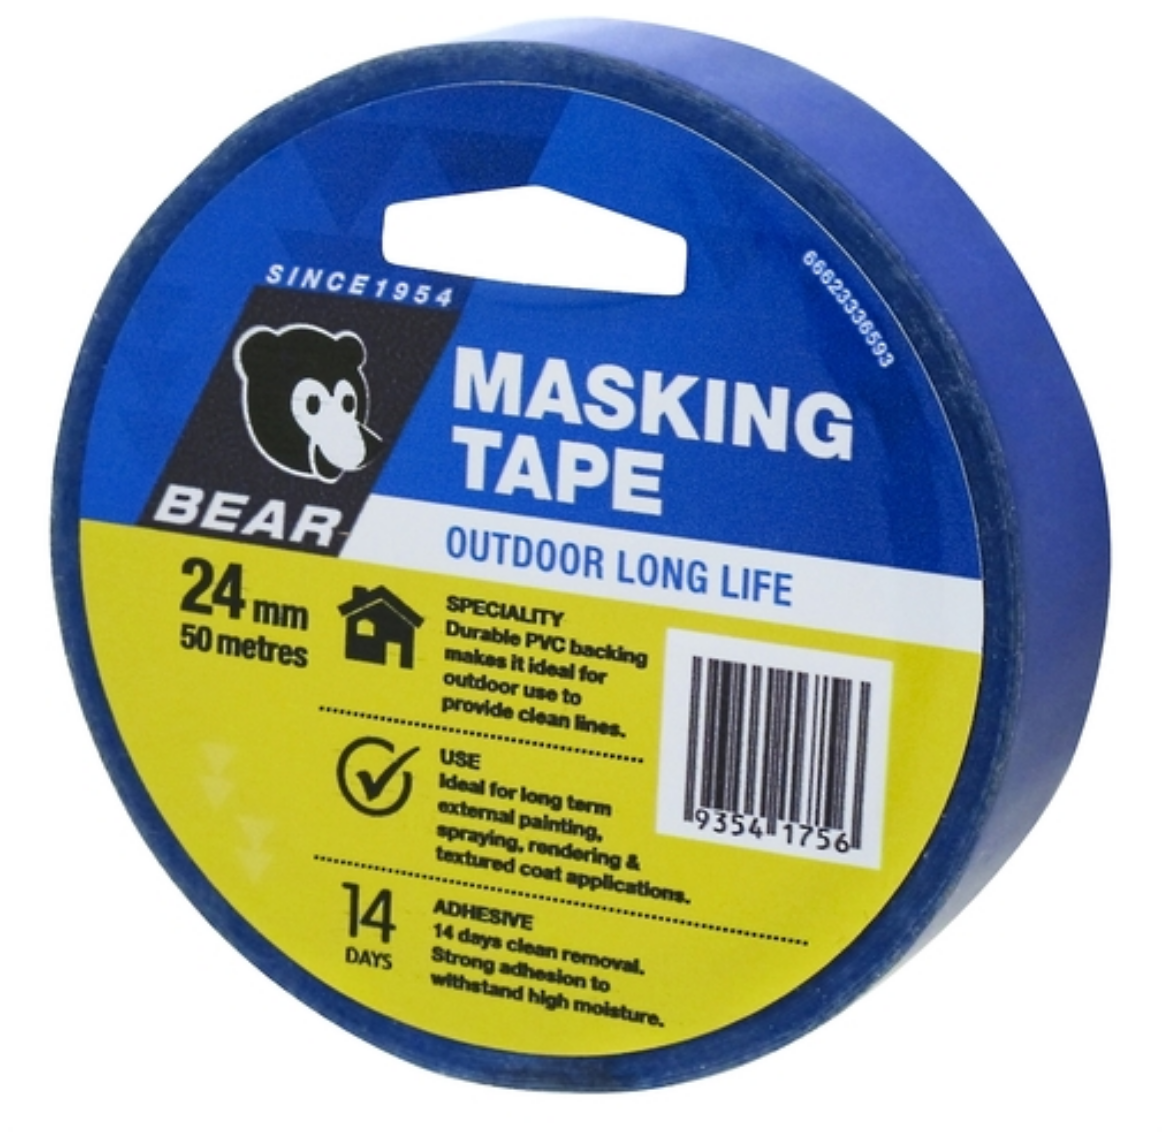 Picture of OUTDOOR LONG LIFE MASKING TAPE 24mm x 50M BEAR - 14 DAYS